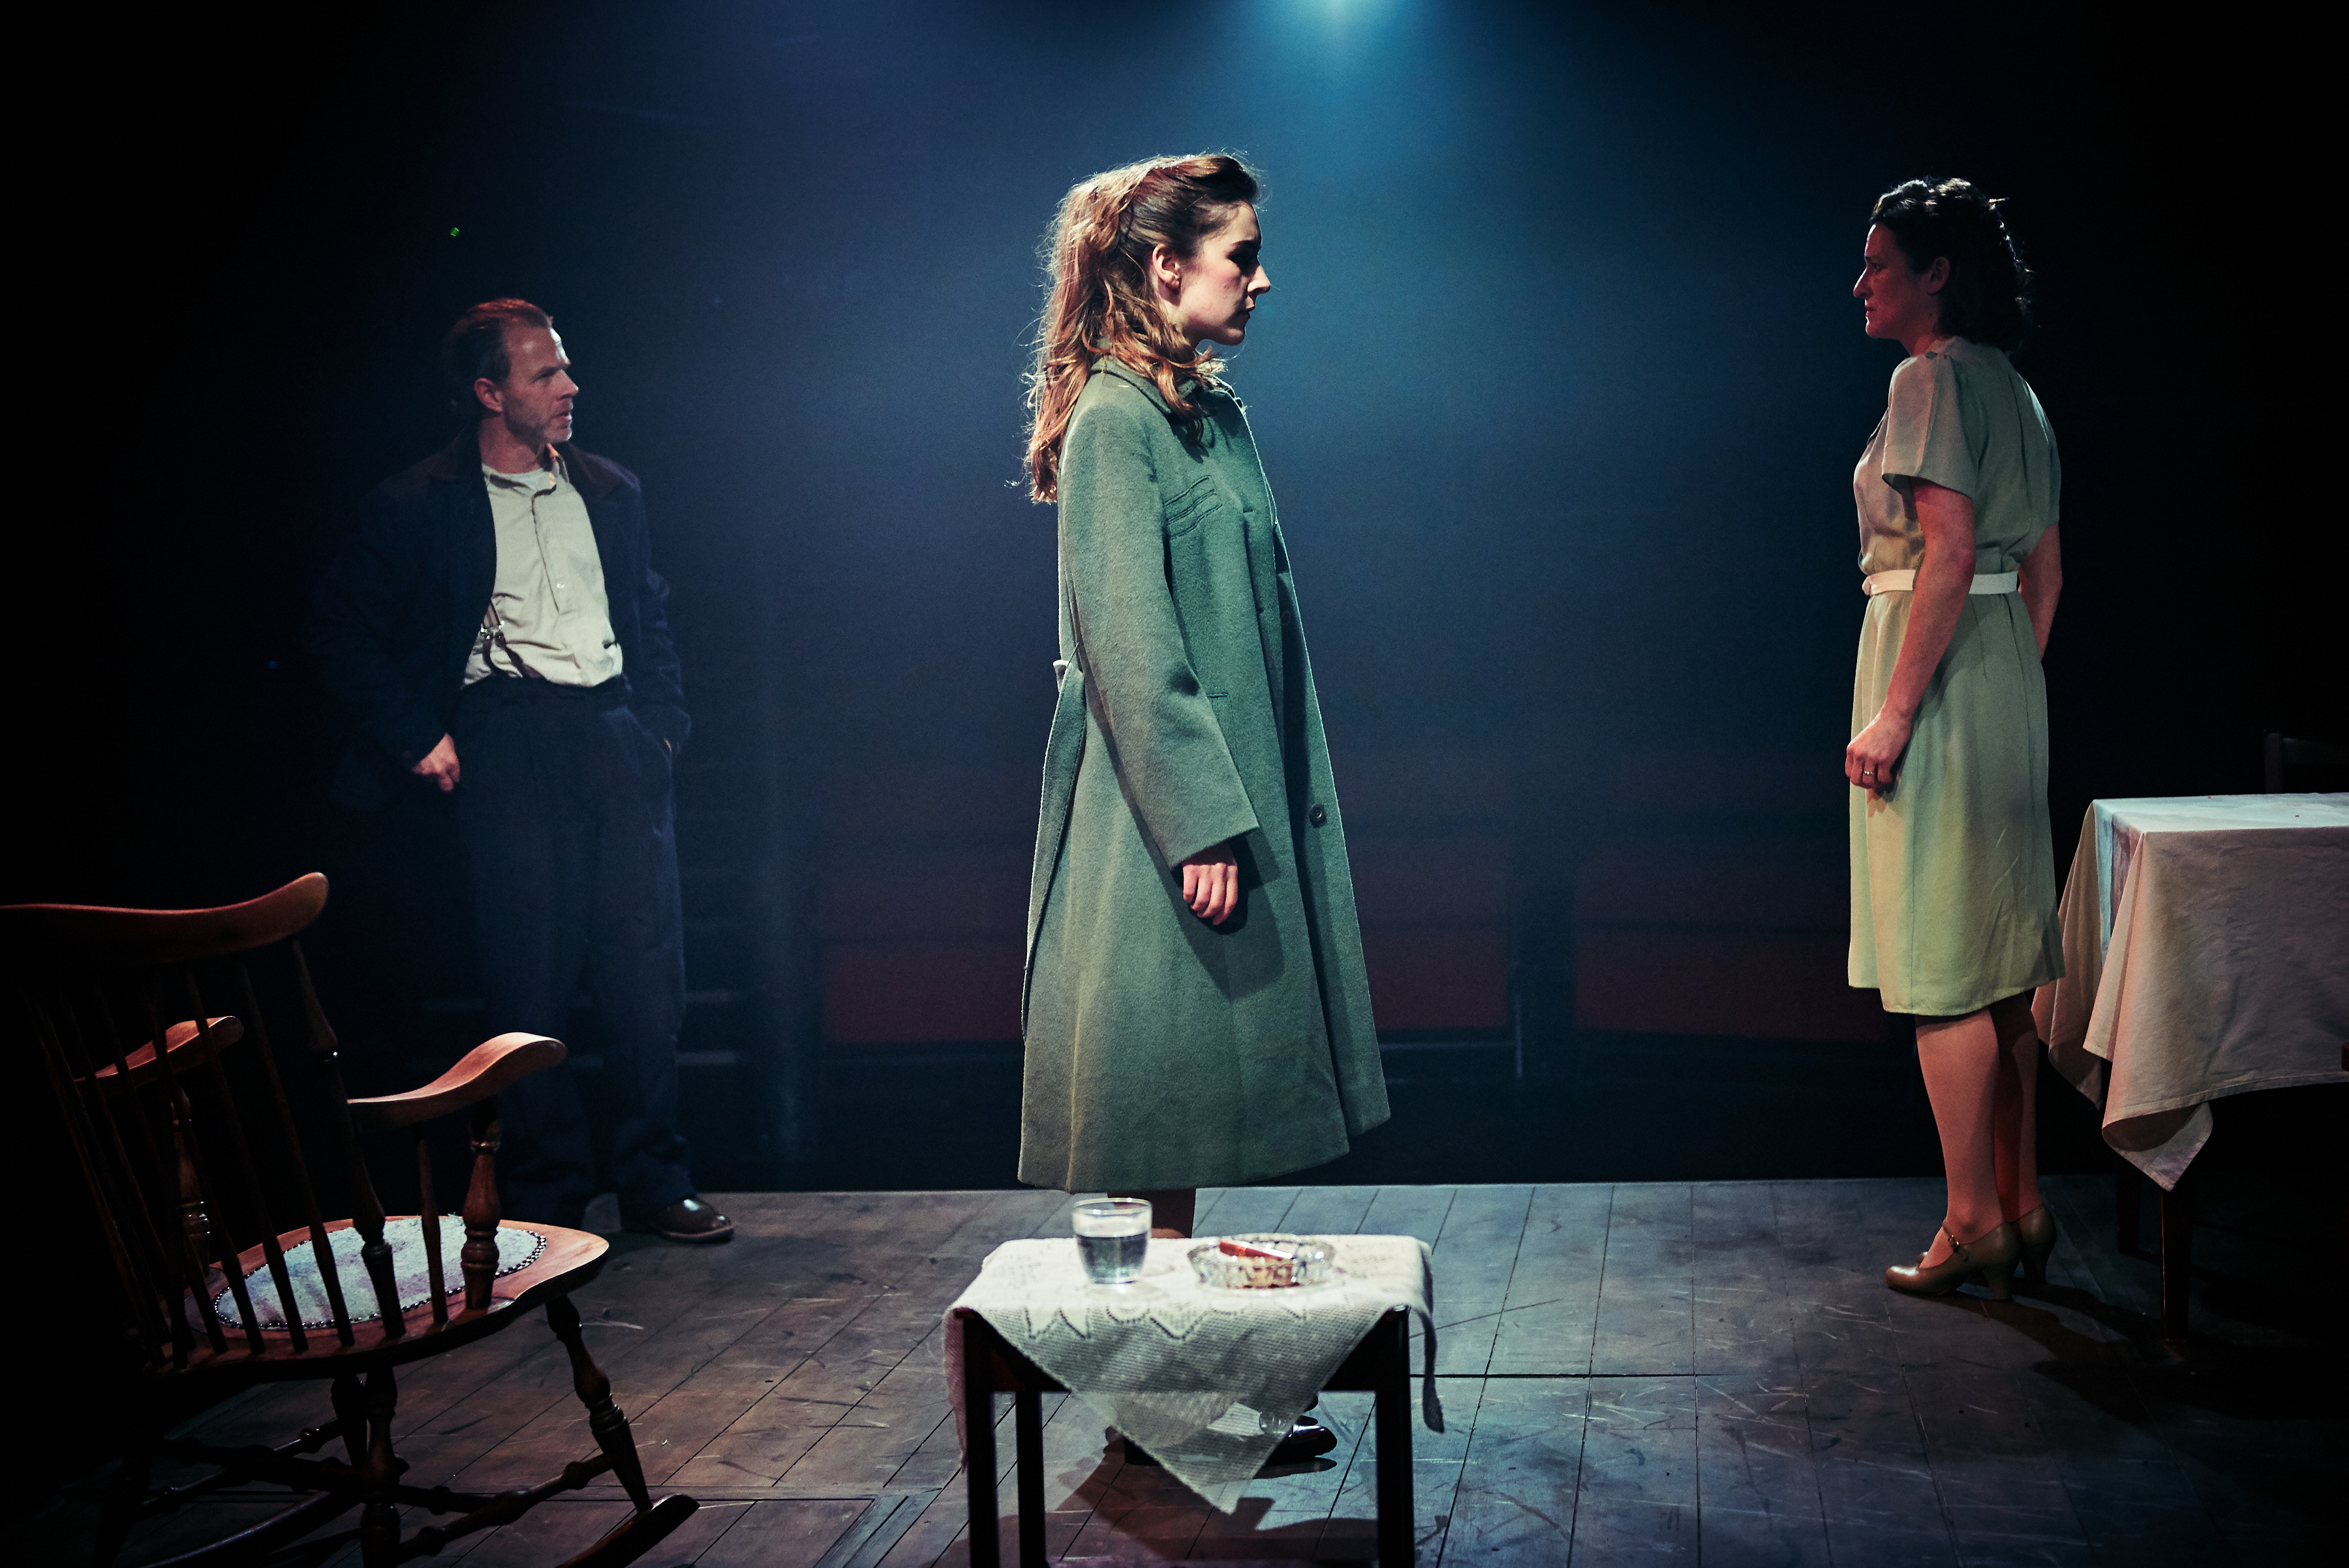 BWW Review: A VIEW FROM THE BRIDGE, Tobacco Factory Theatres